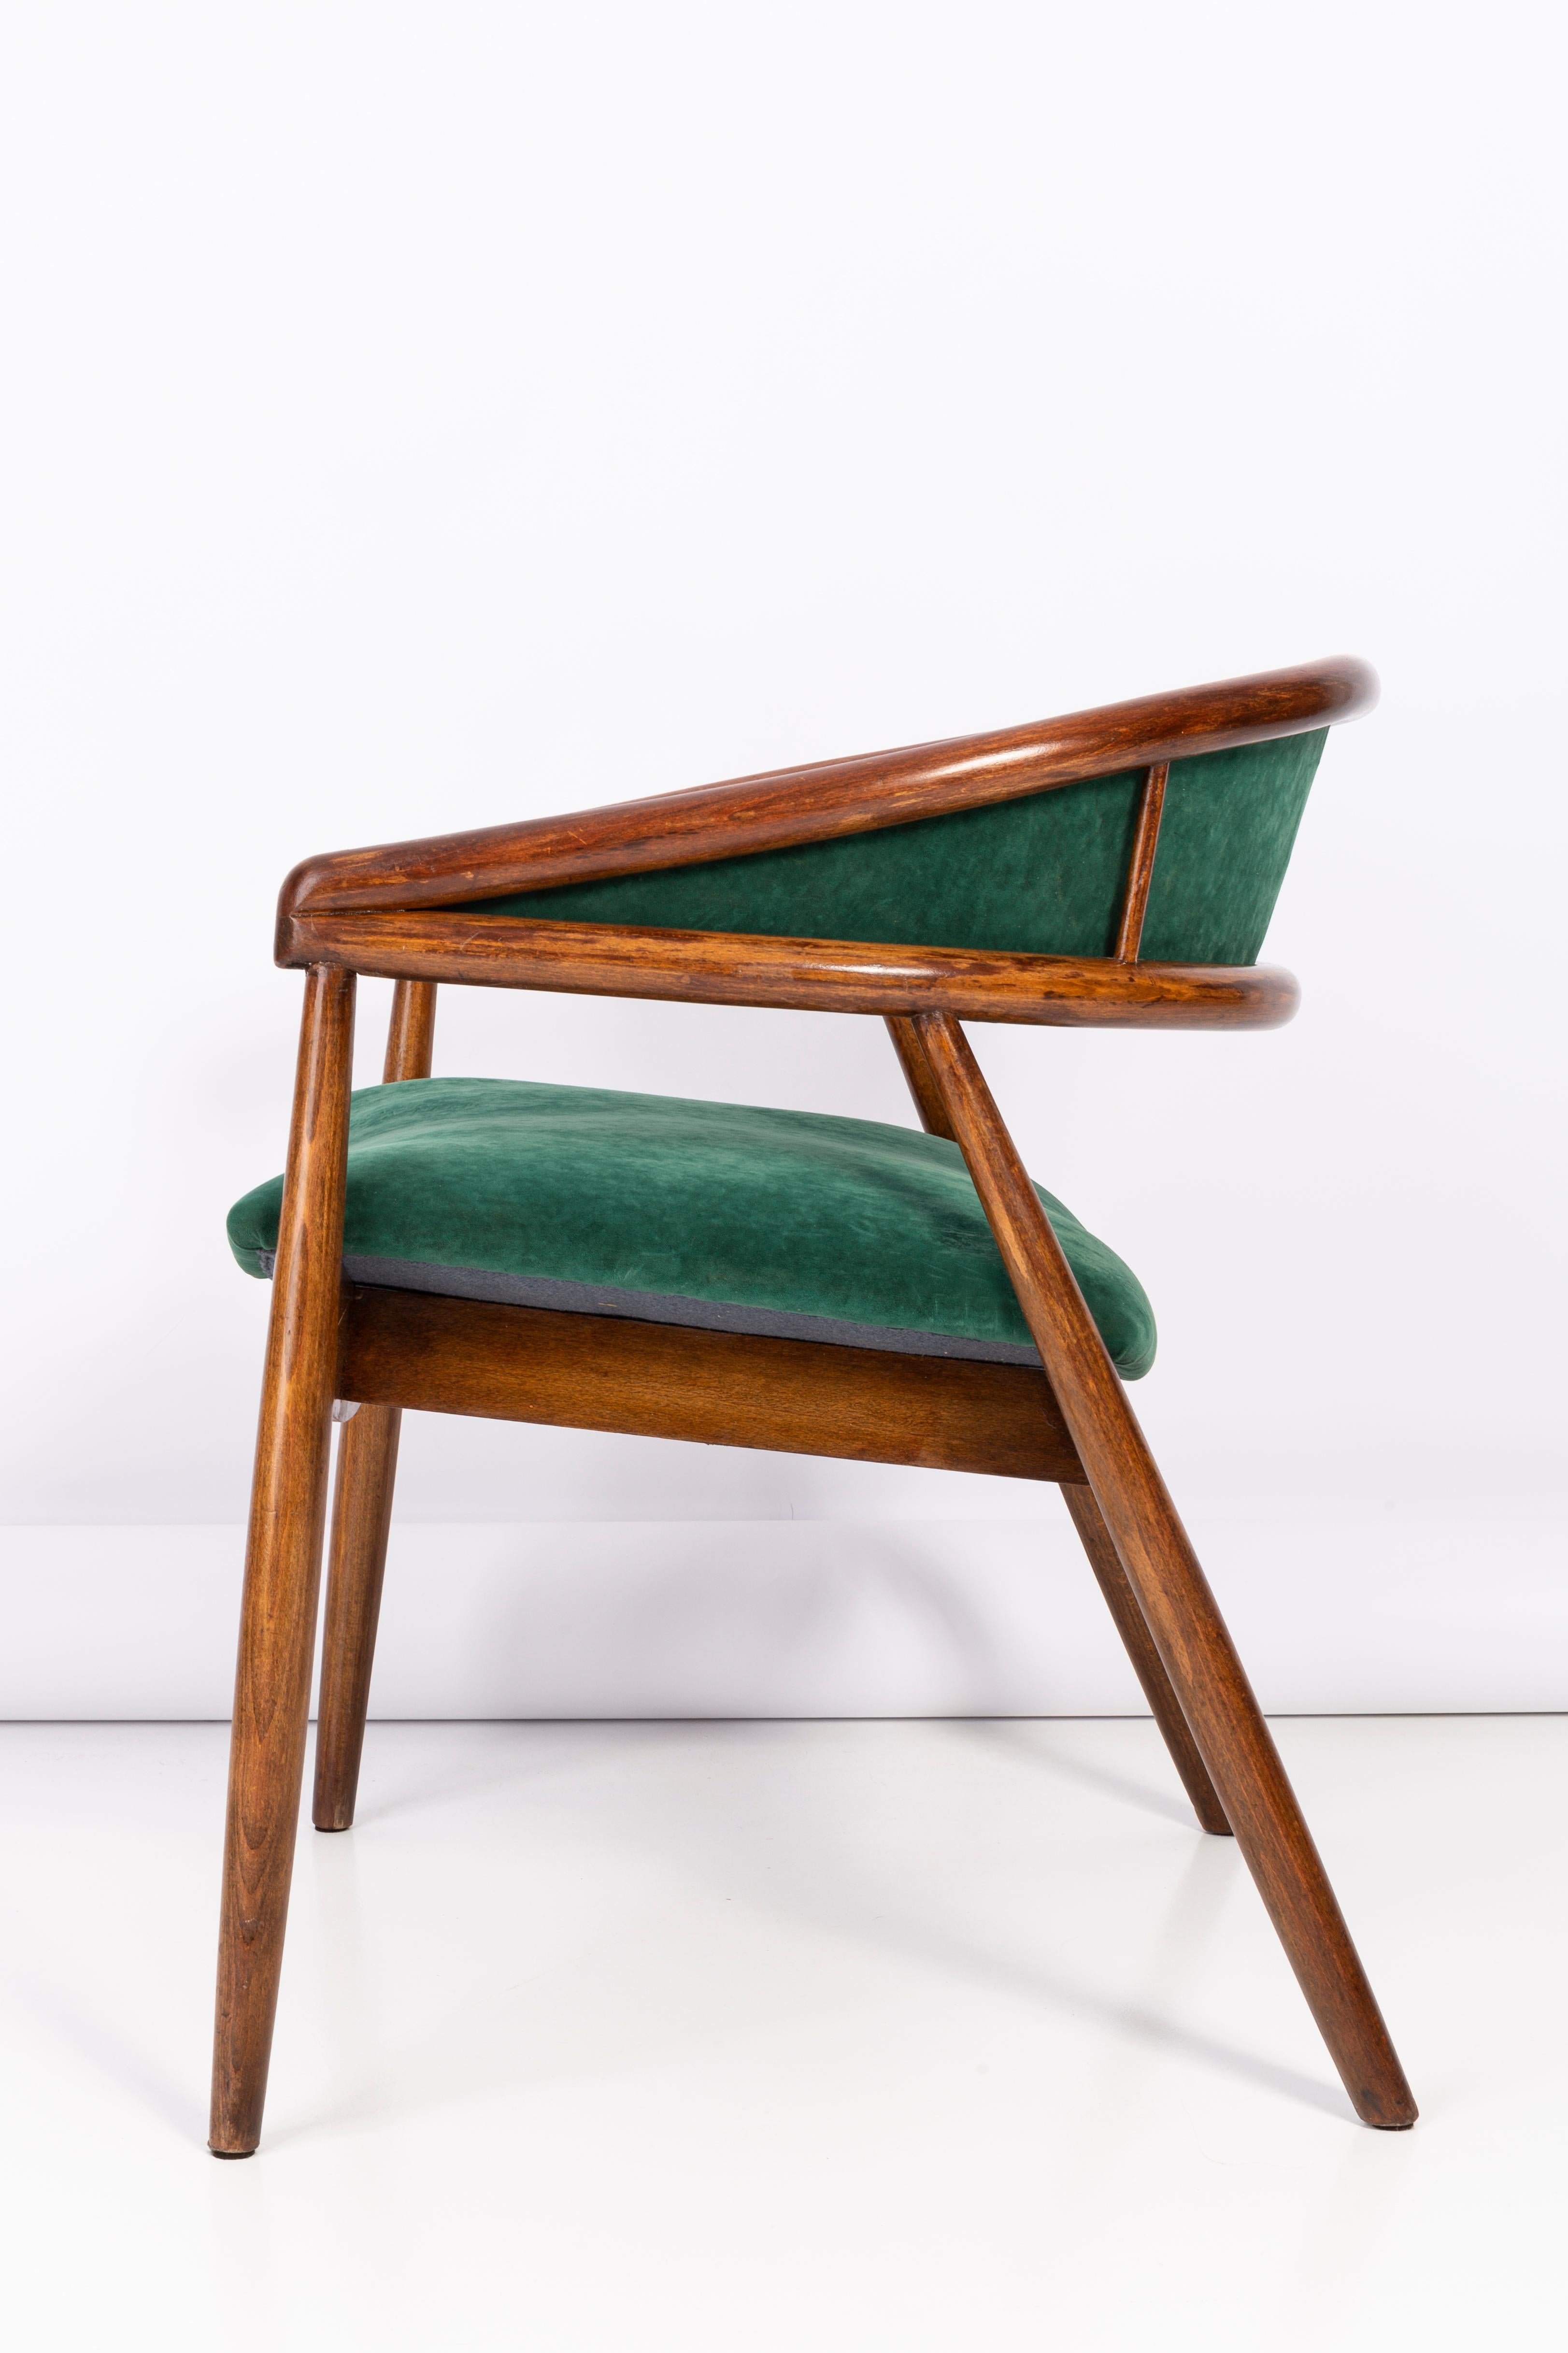 Set of Two Vintage James Mont Bent Beech Armchairs, Dark Green, Europe, 1960s For Sale 1